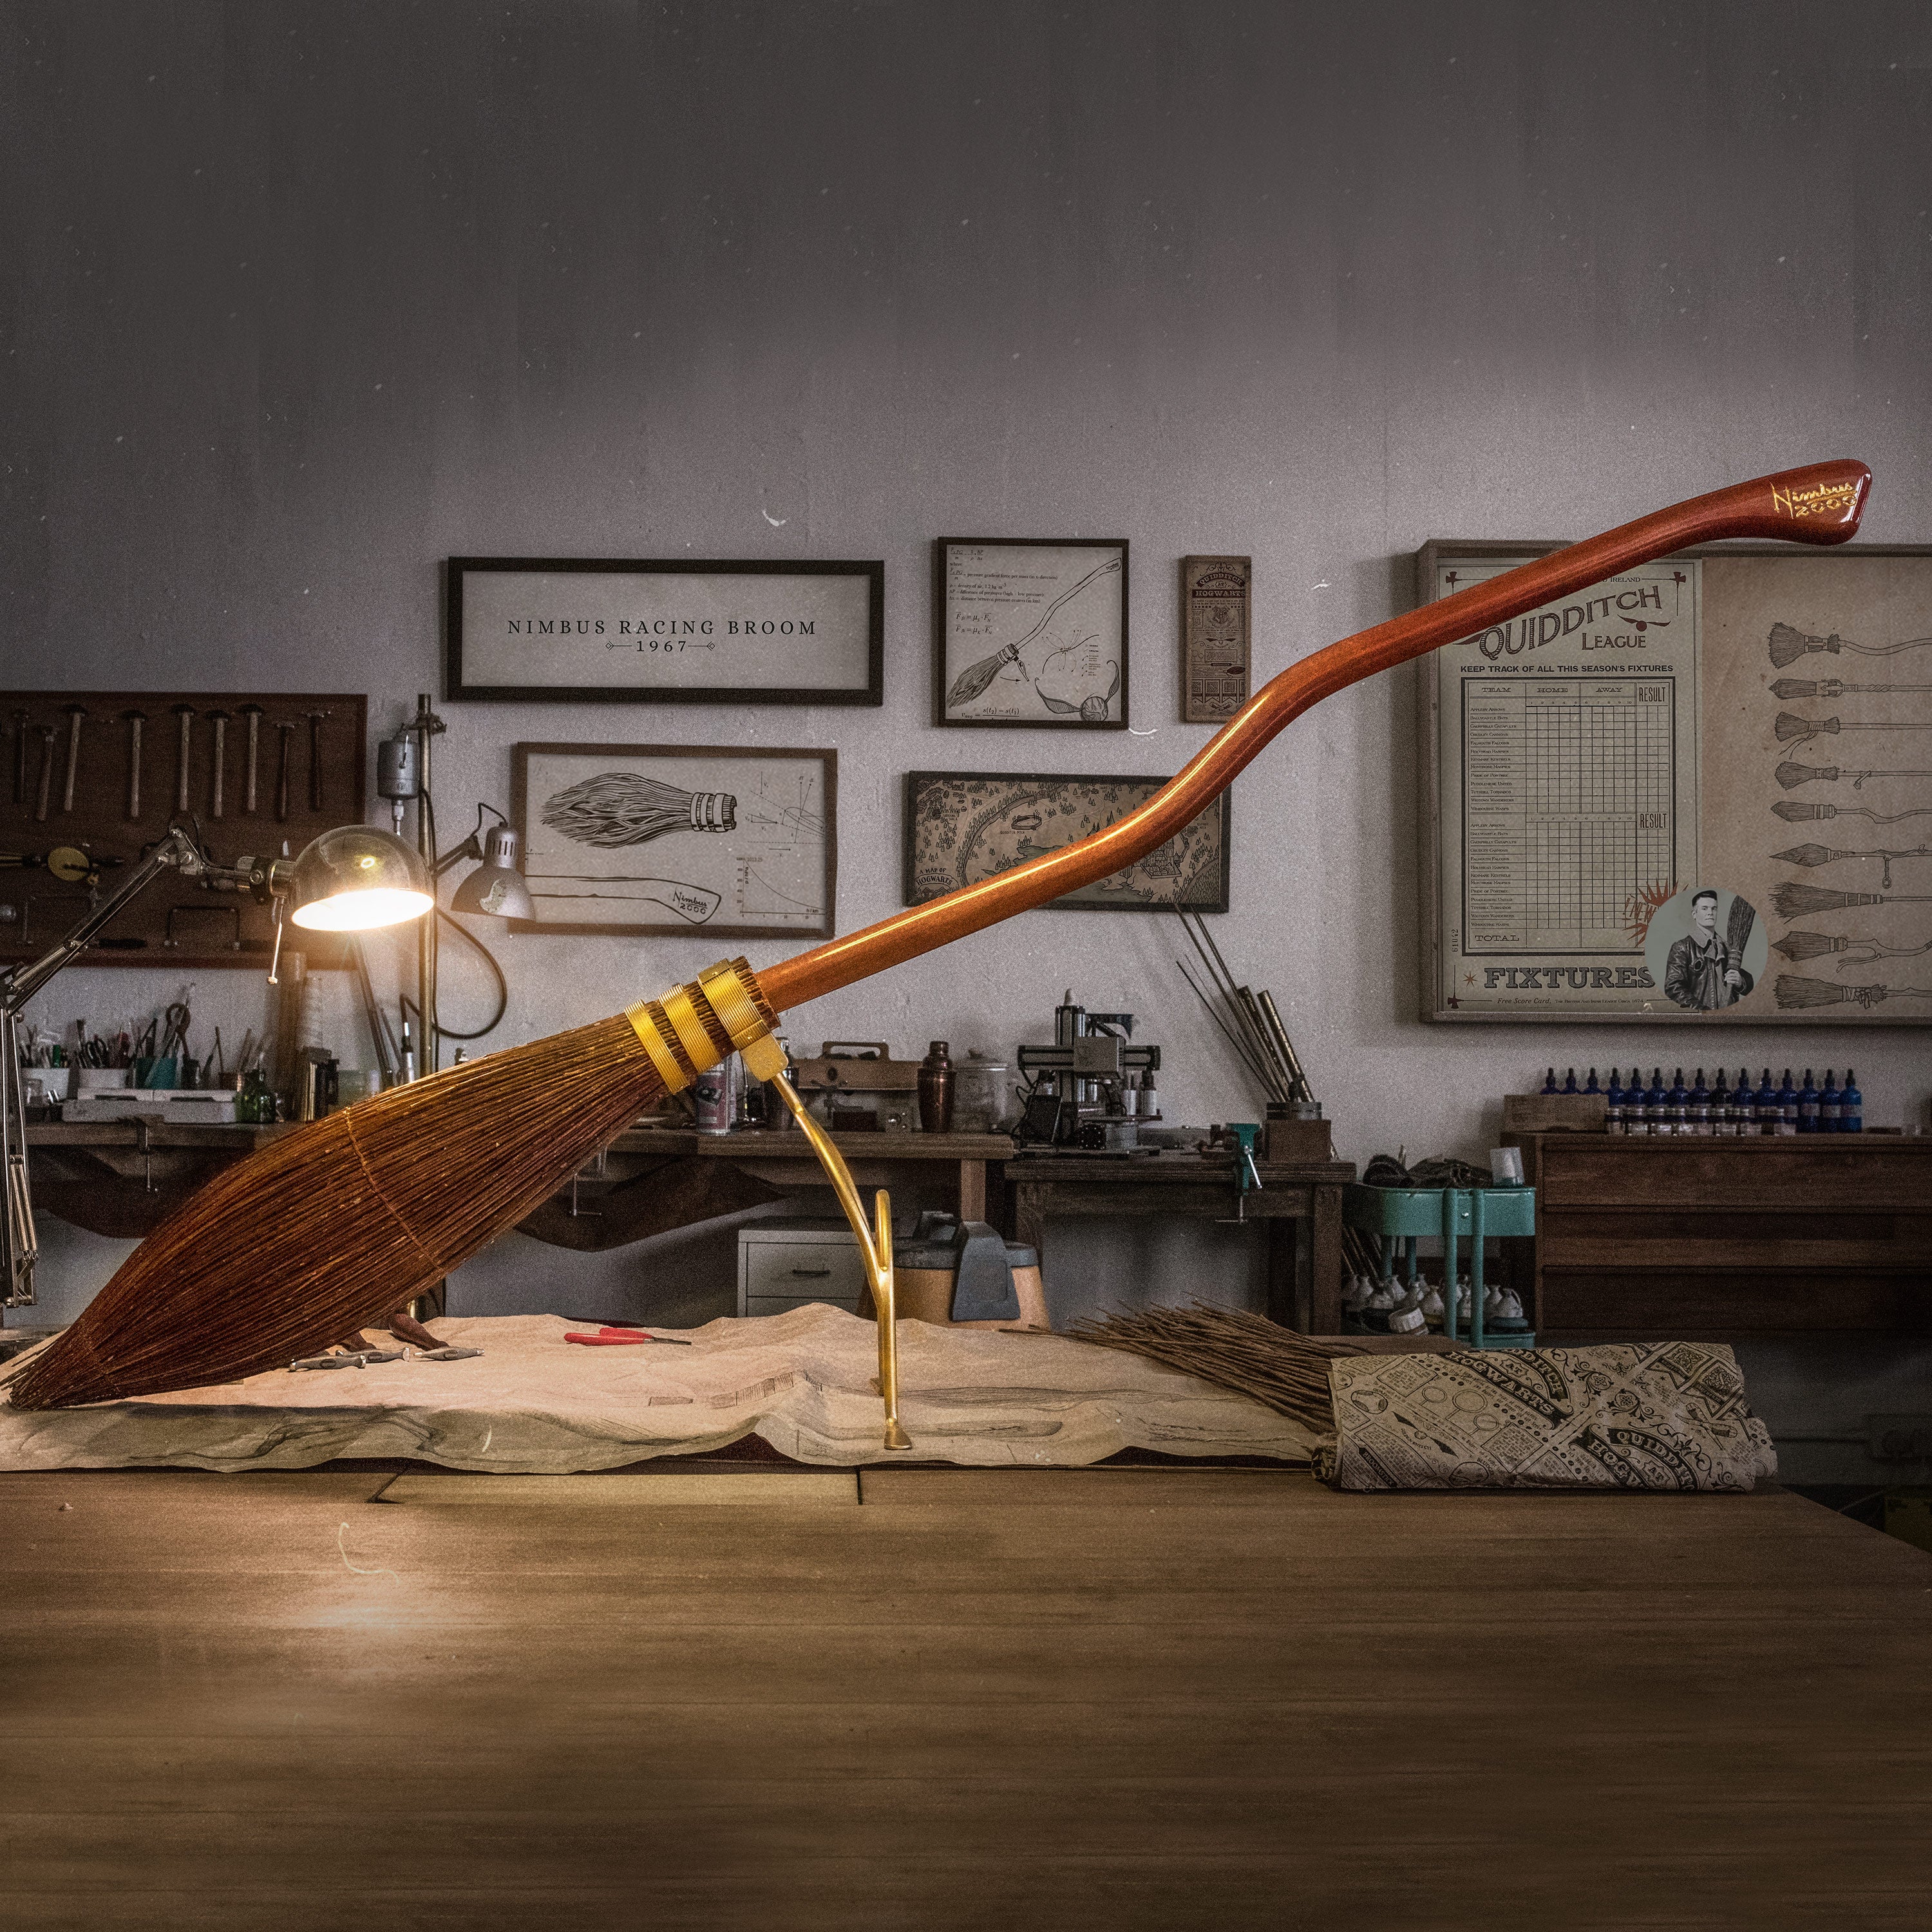 How to Make a Comic-Con Approved Harry Potter Nimbus 2000 Broom